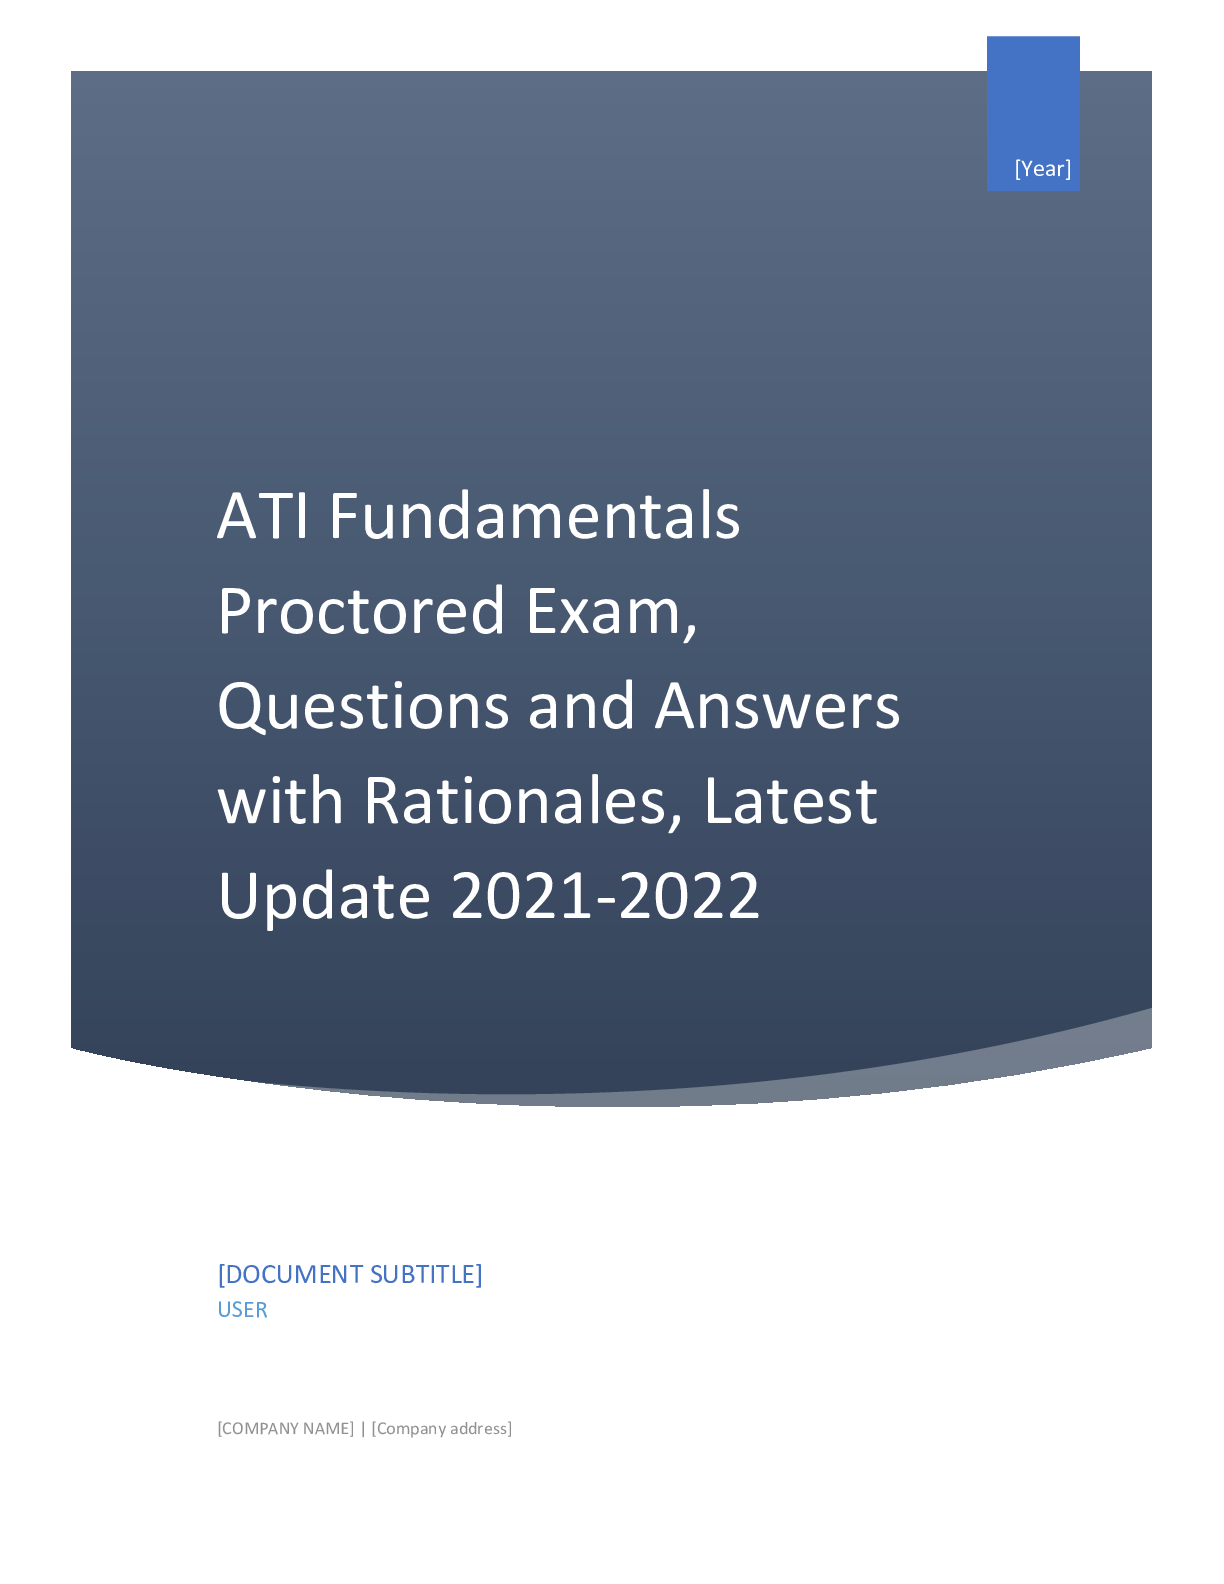 ATI Fundamentals Proctored Exam, Questions and Answers with Rationales